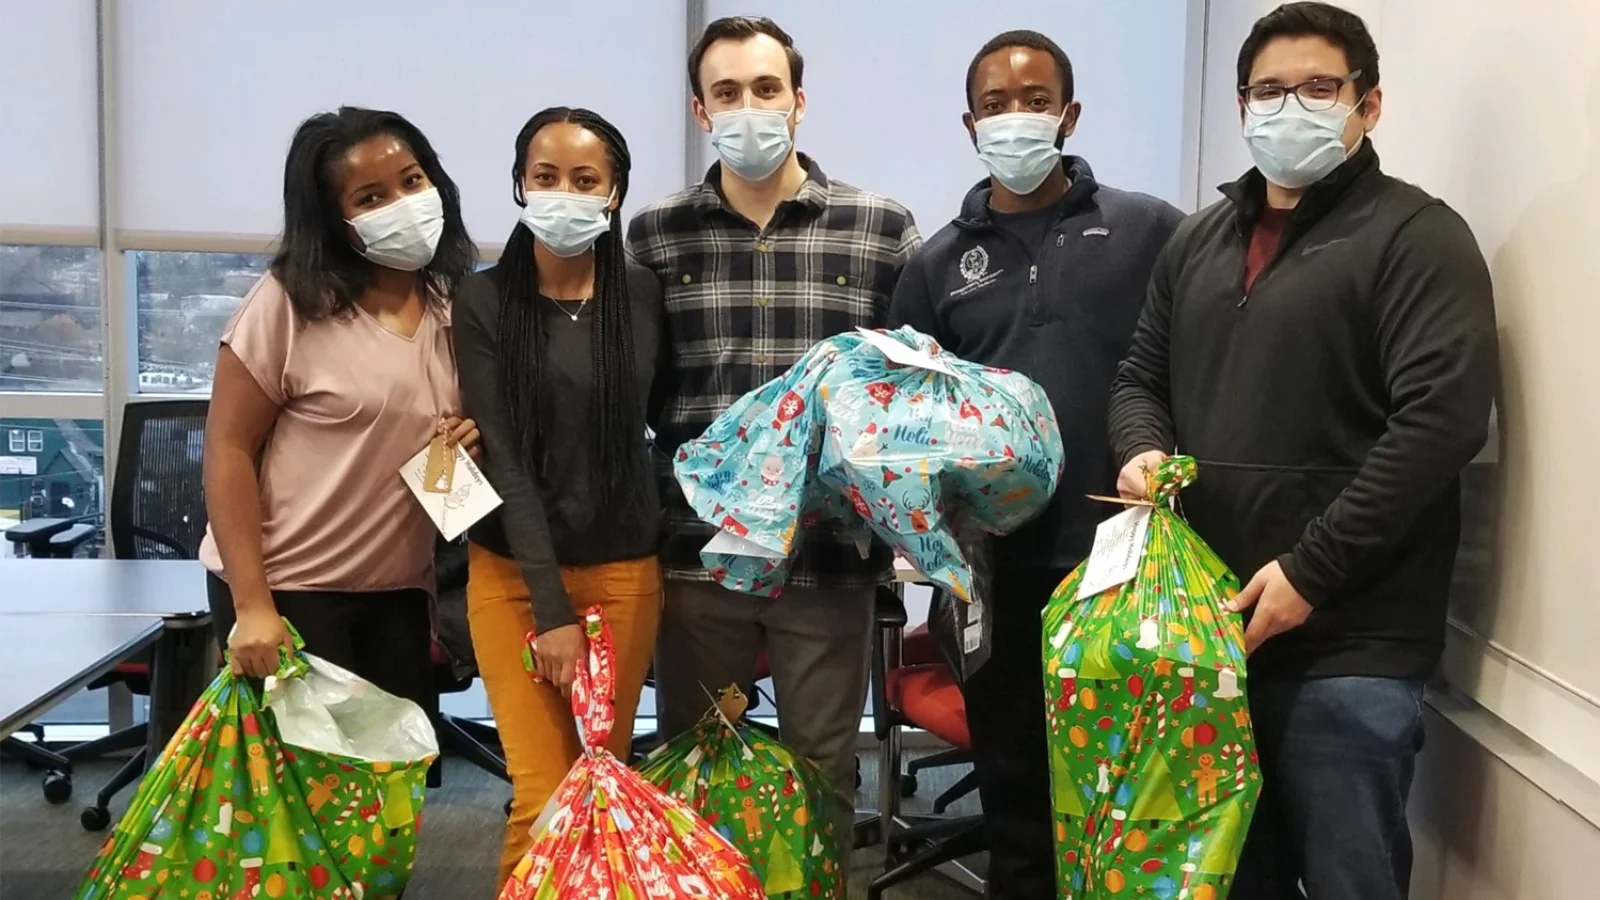 Five students wear masks and hold wrapped presents inside a conference room.